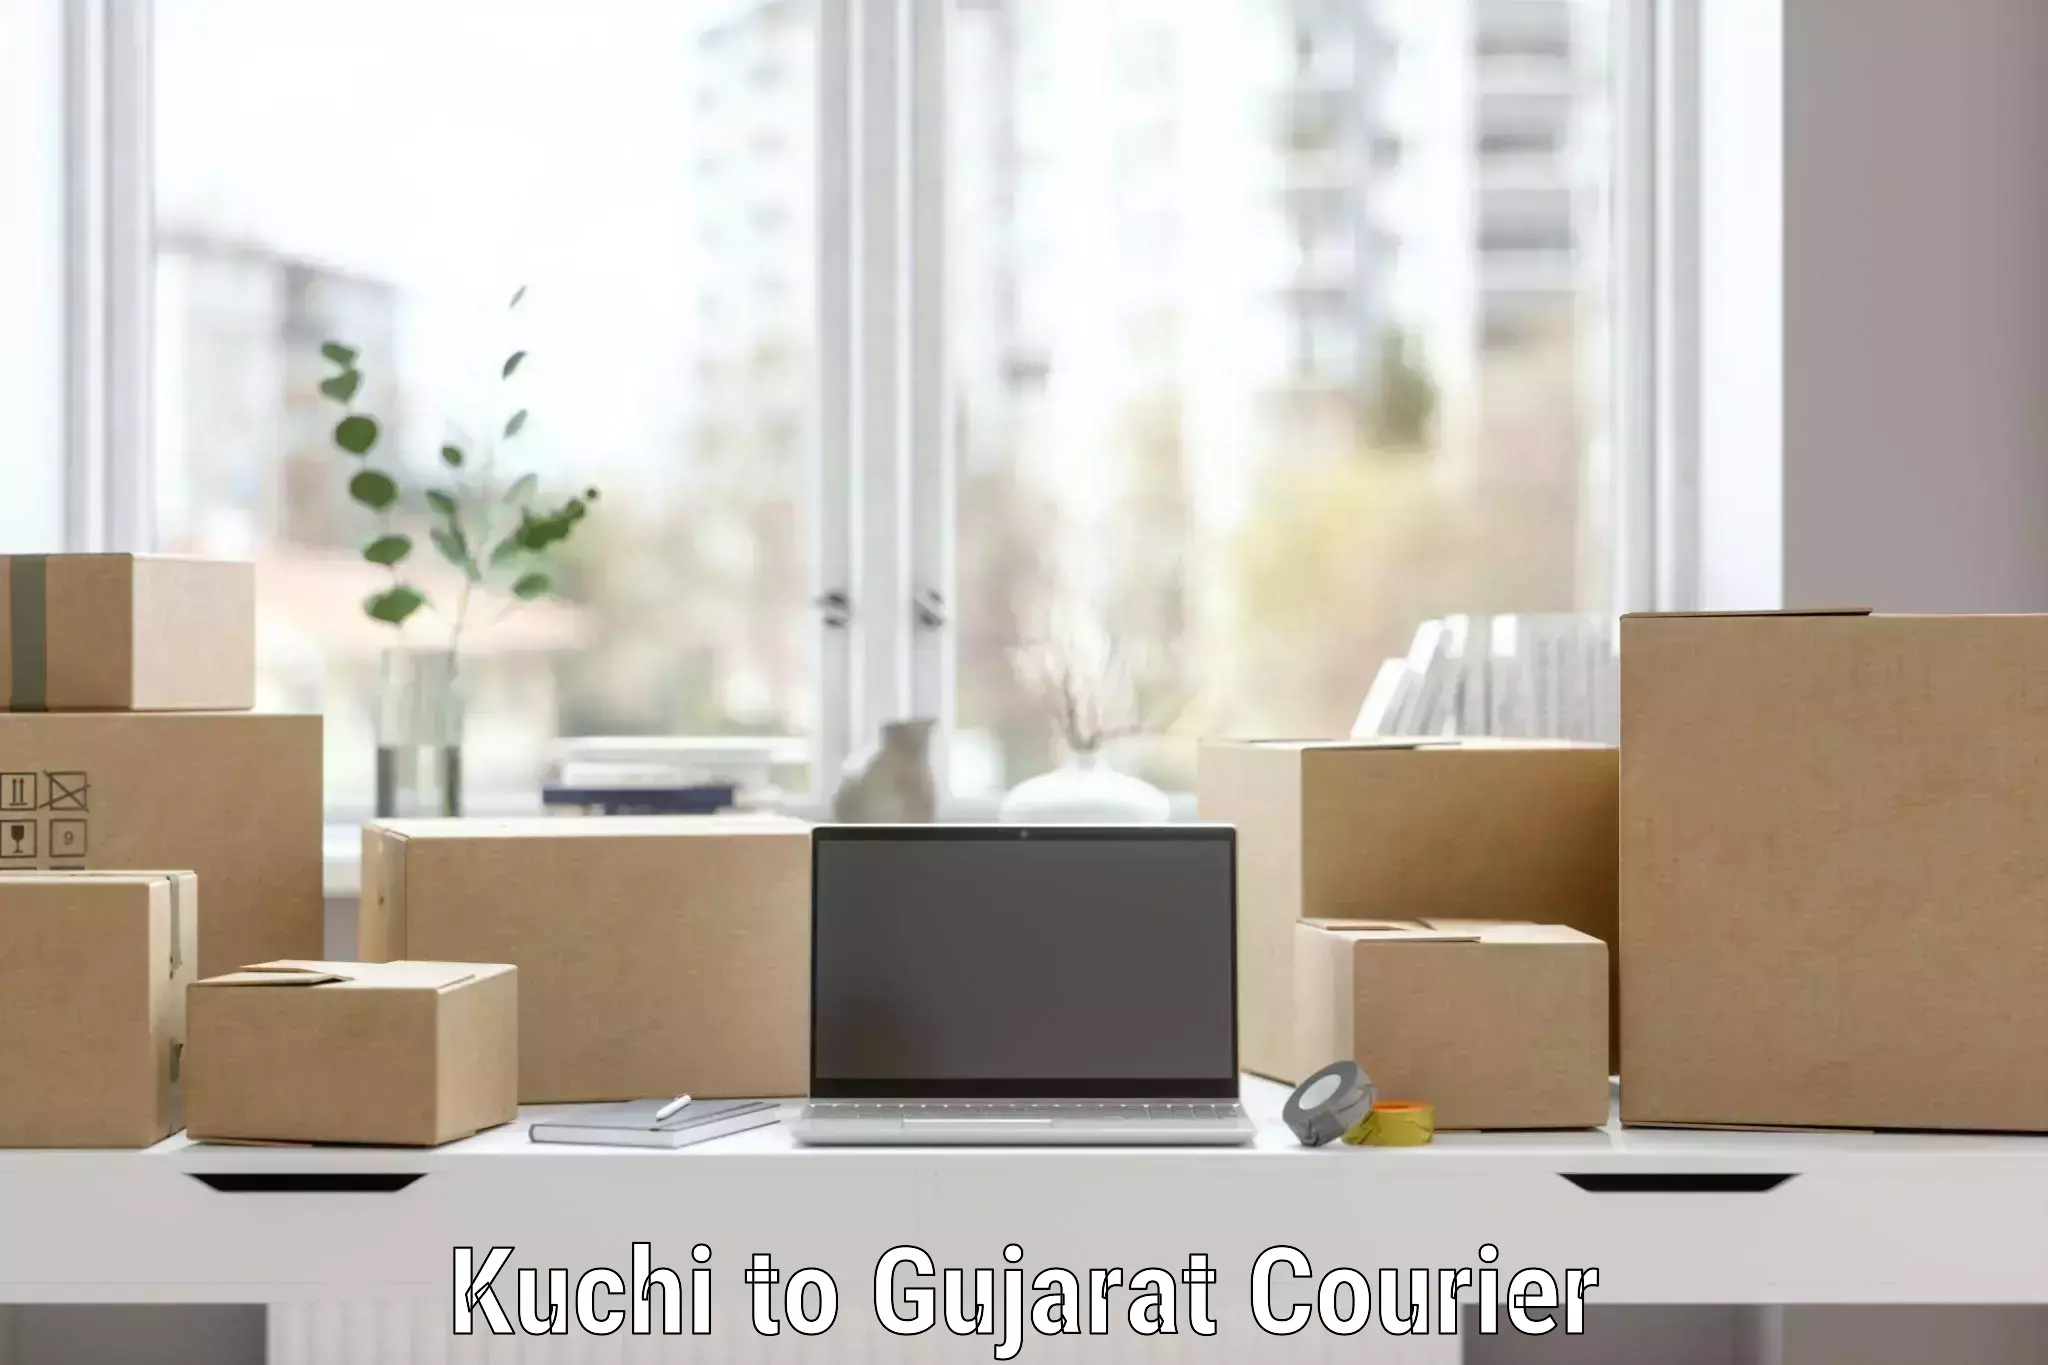 Home relocation experts Kuchi to Gujarat